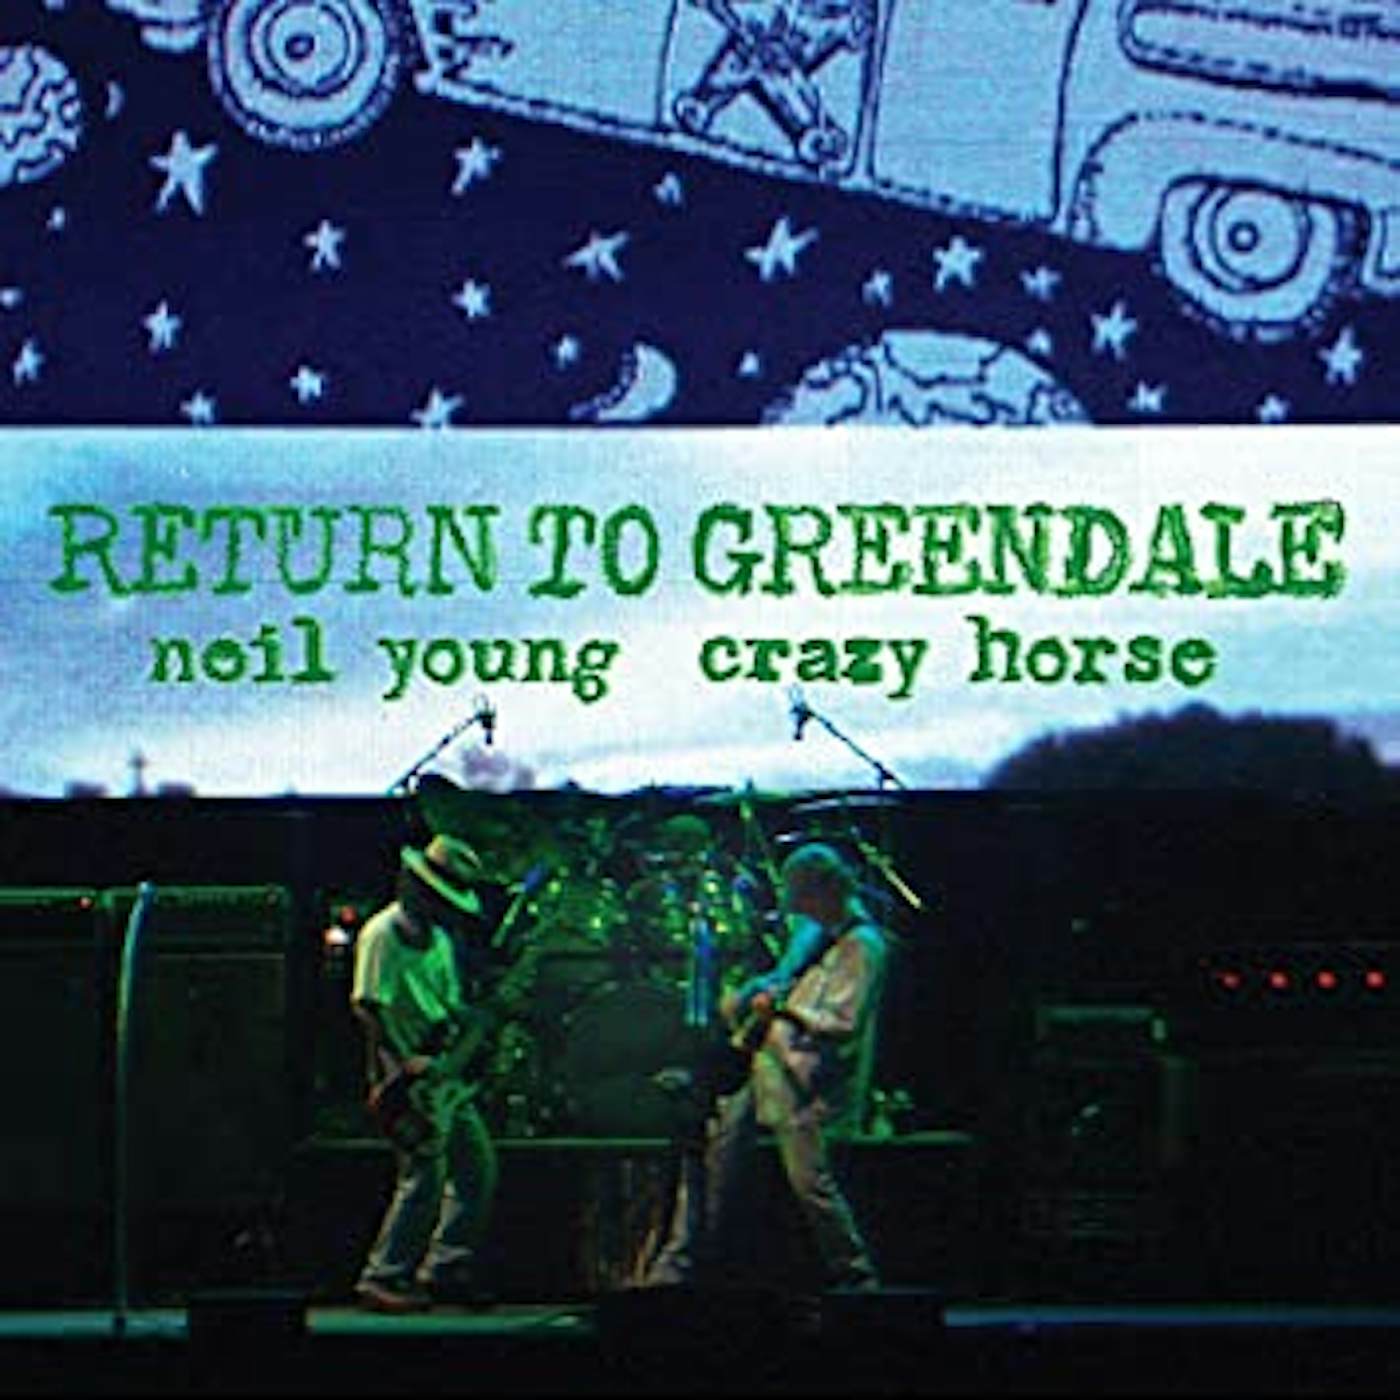 Neil Young & Crazy Horse RETURN TO GREENDALE (DELUXE EDITION/6LP) Vinyl Record